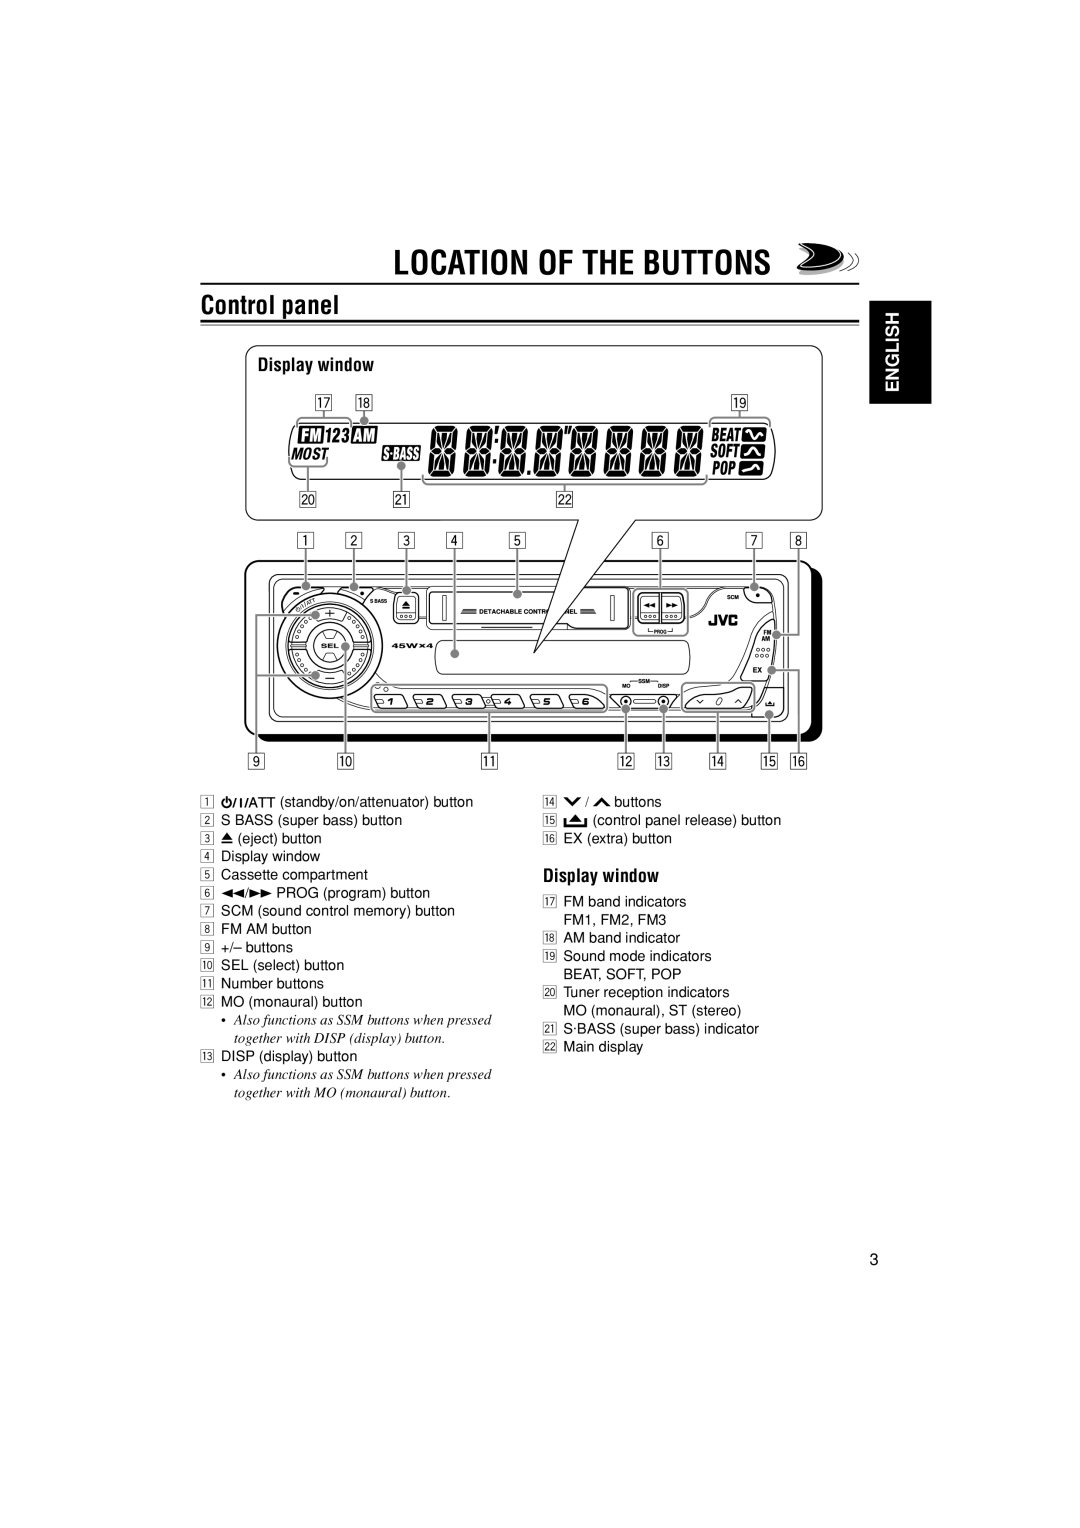 JVC KS-F185 manual Location Of The Buttons, Control panel, Display window, English 